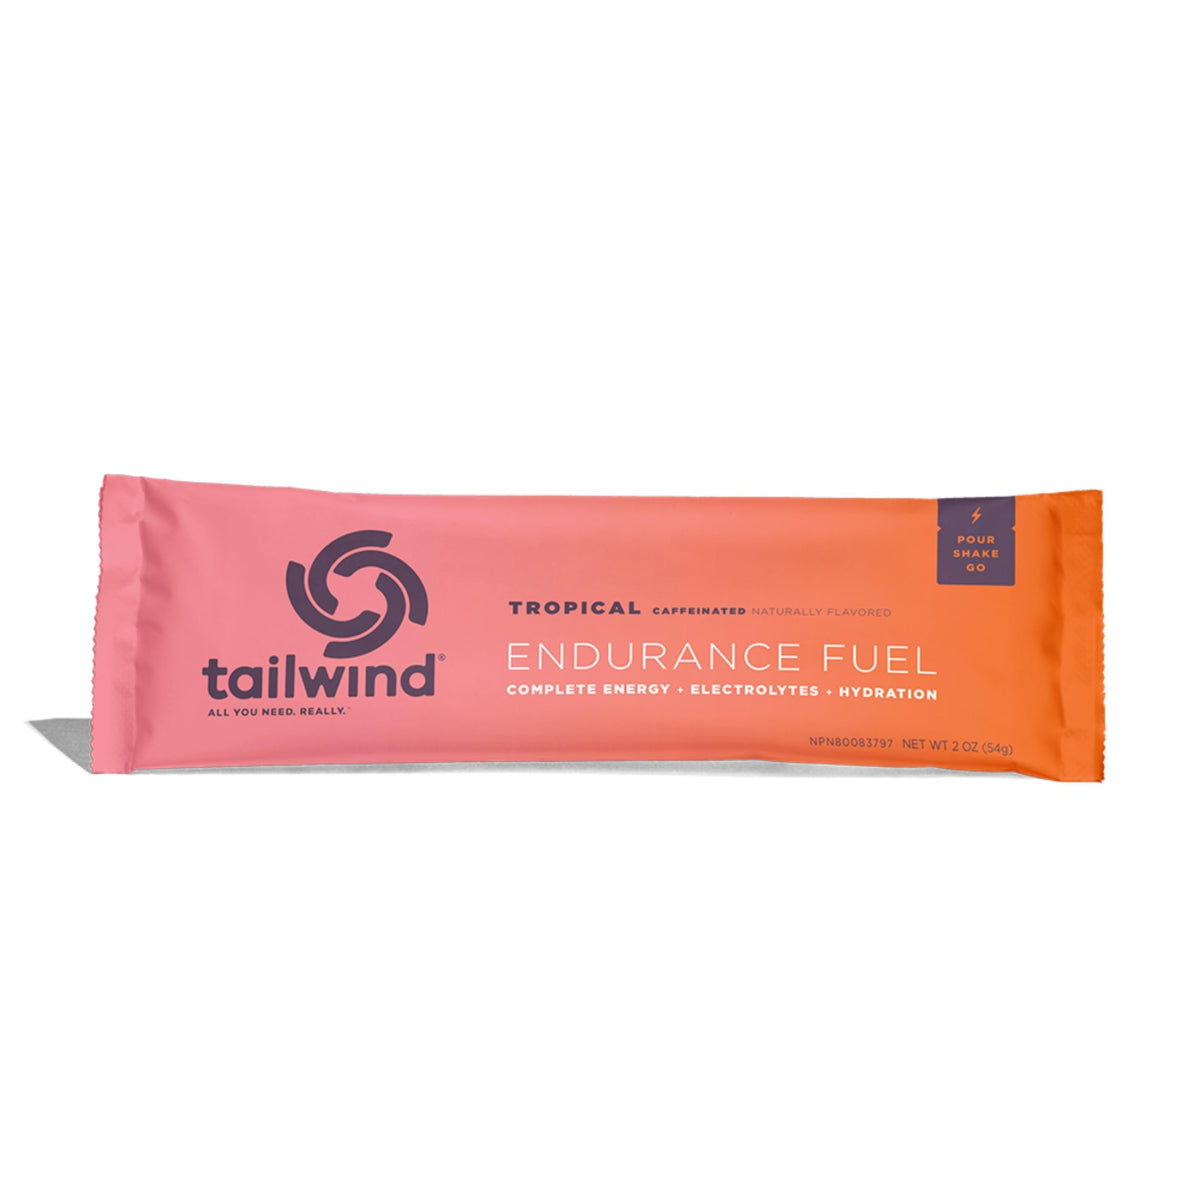 Tailwind Nutrition Tropical Endurance Fuel with caffeine